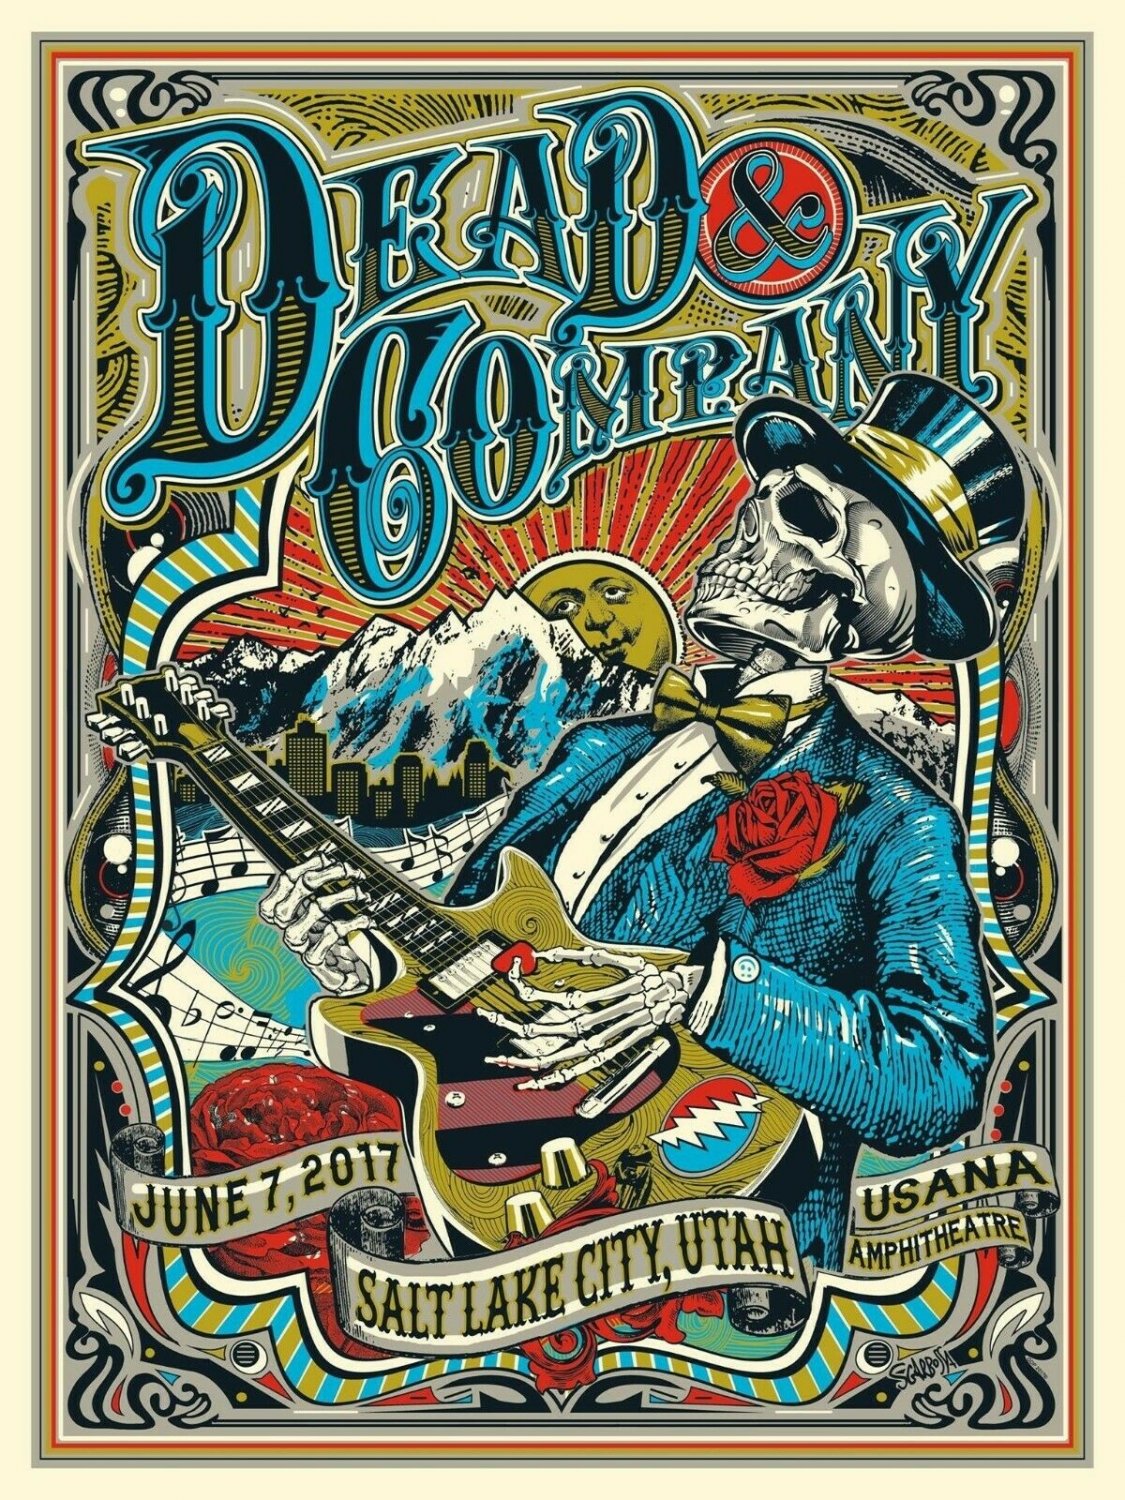 Dead & the Company Band Poster 13x19 inches